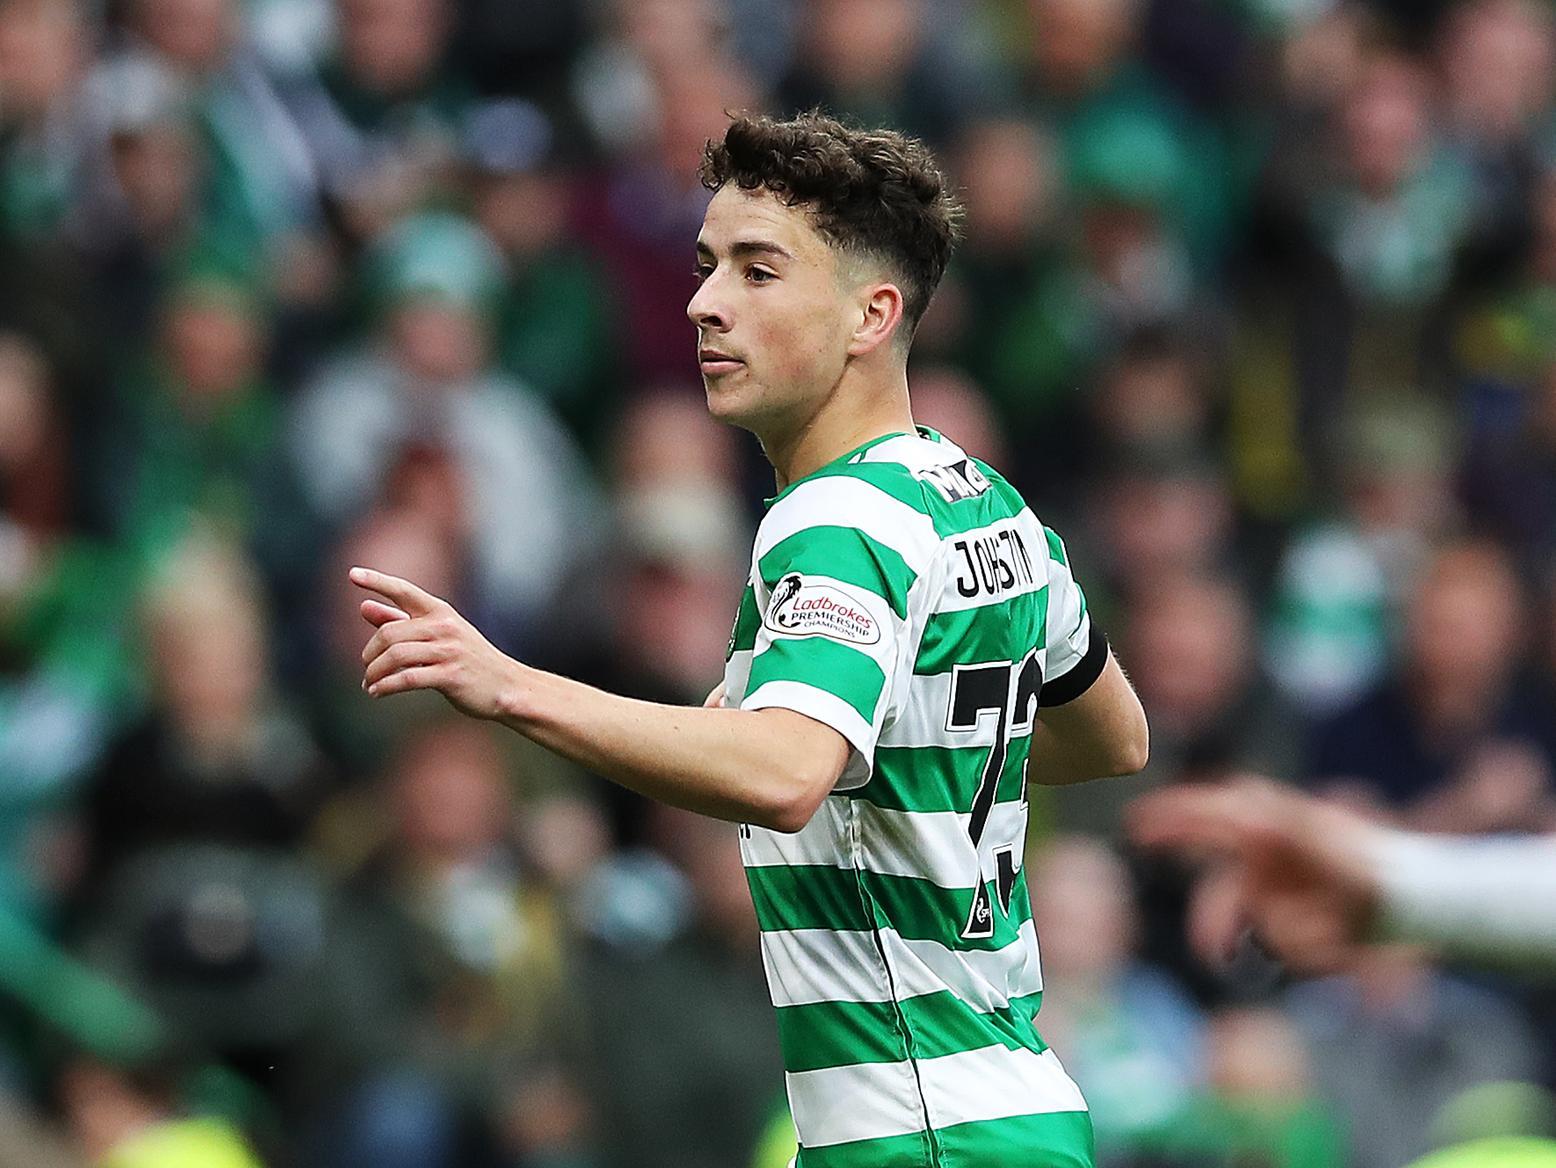 Another Celtic youngster to rise through the ranks, Johnston made the switch to the opposite wing, and bagged 17 goals and 12 assists in the 2023/24 season - seriously impressive numbers.